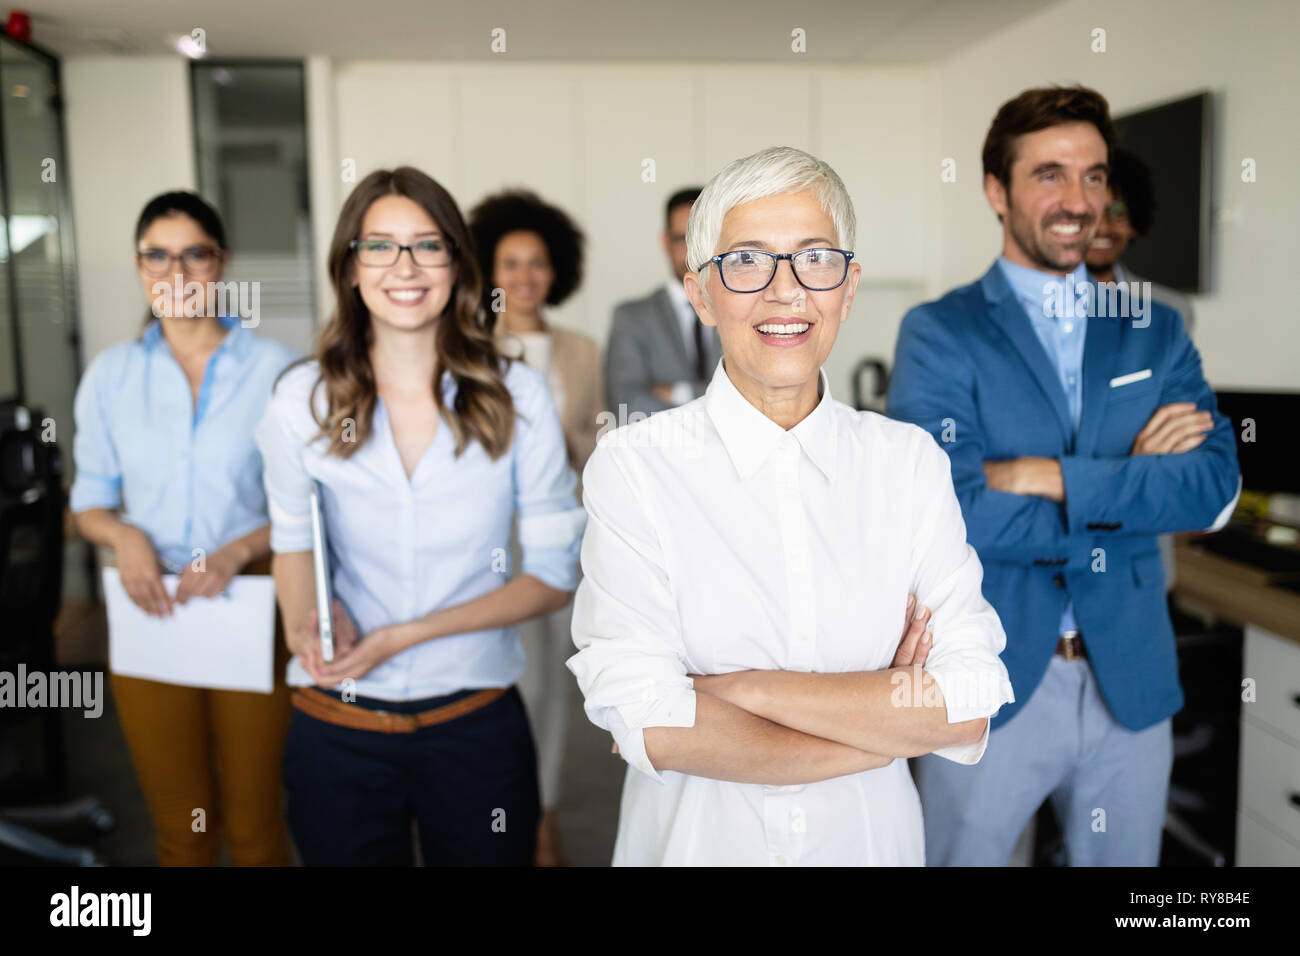 Group of successful business people in office Stock Photo